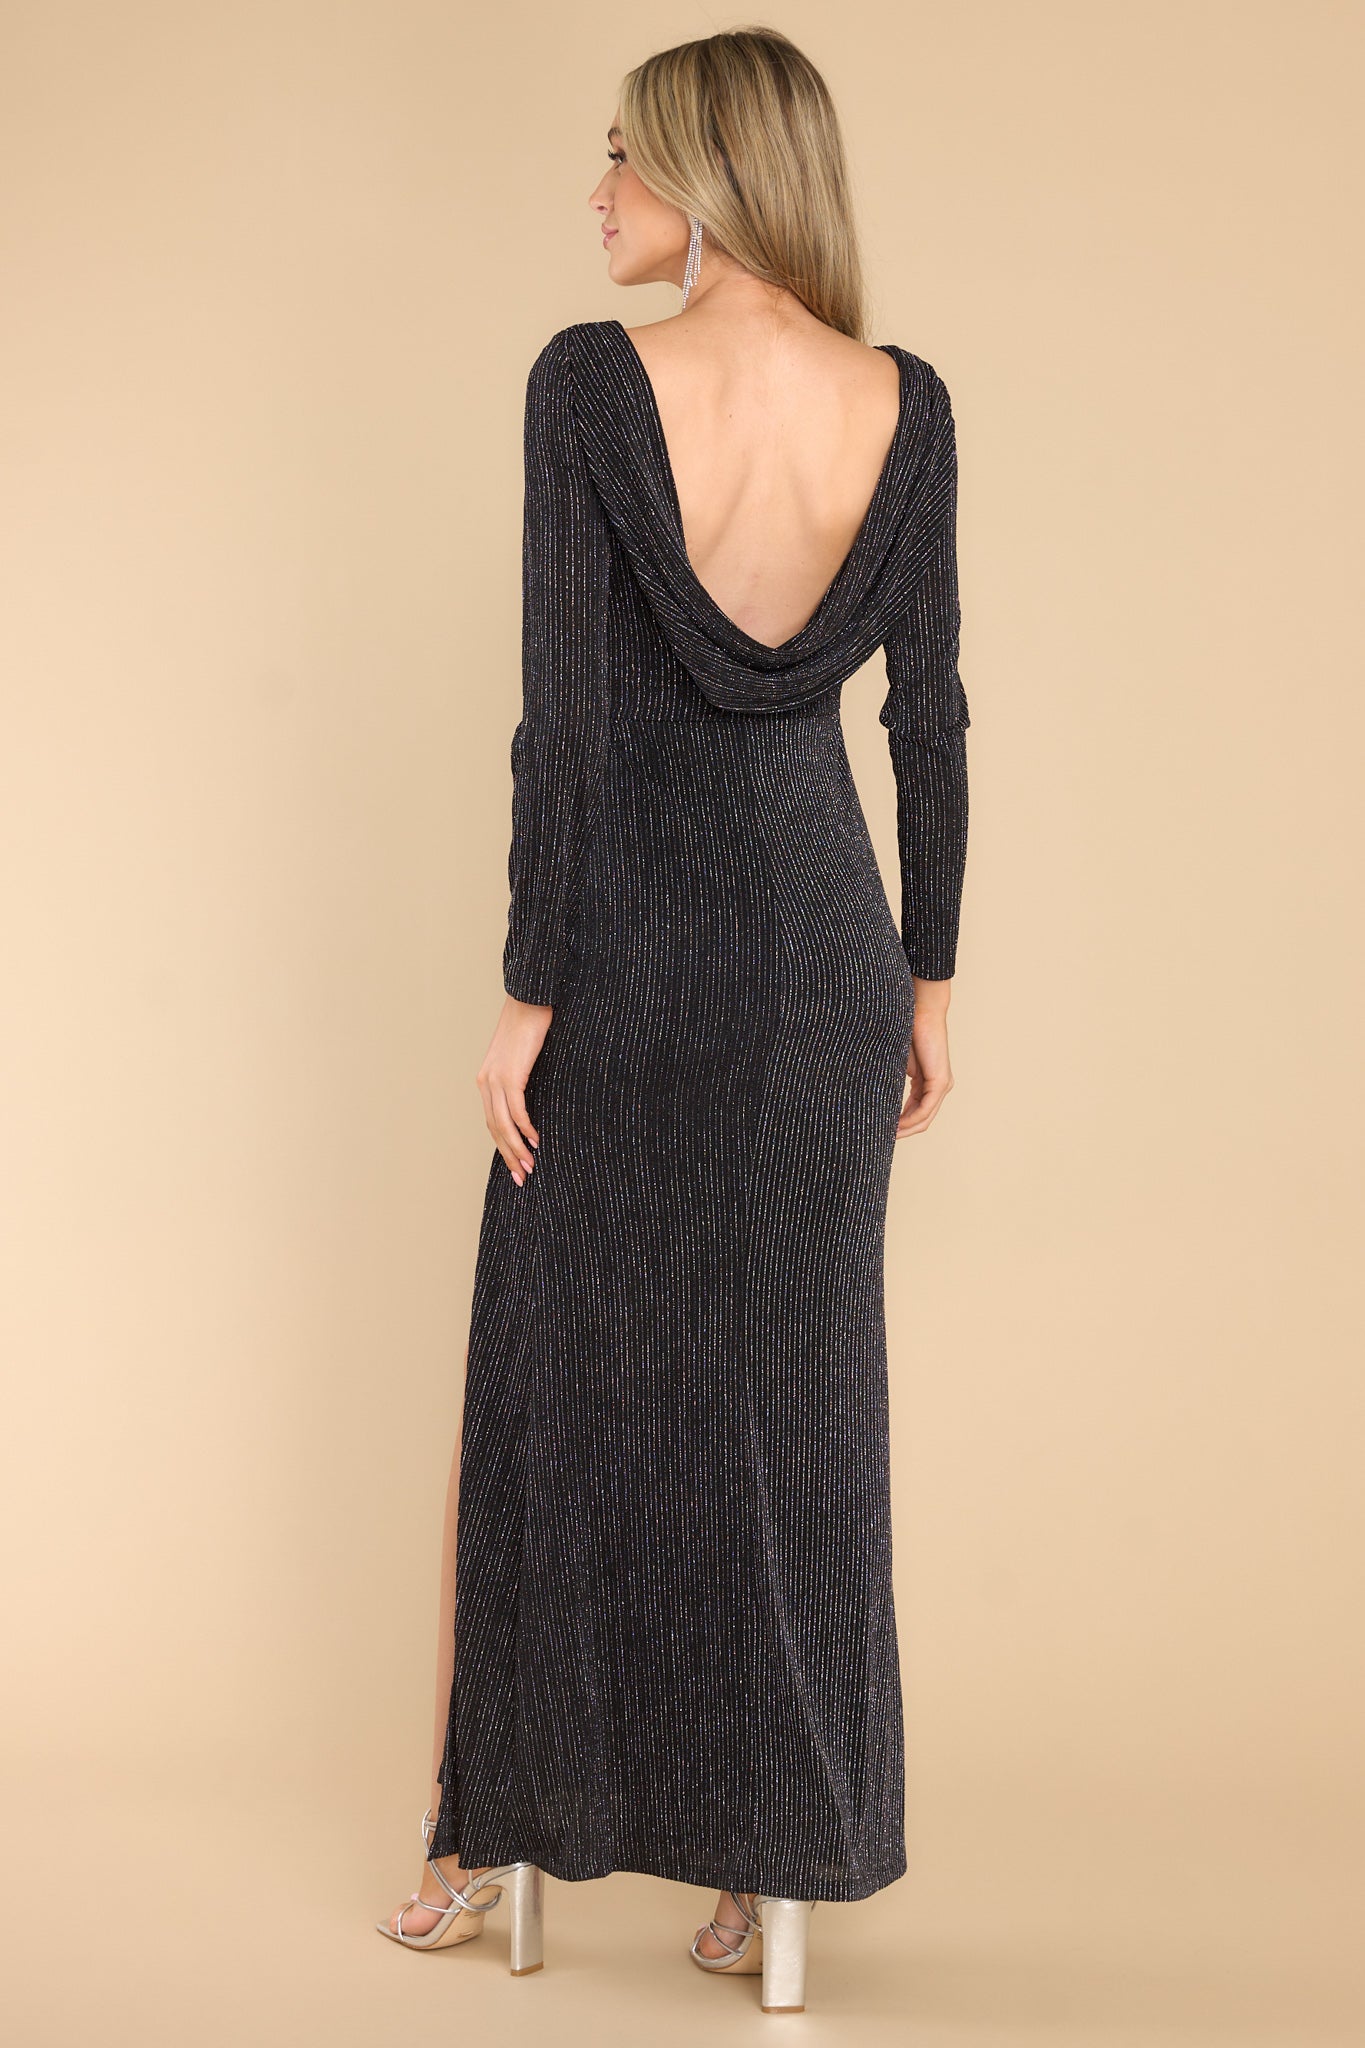 Back view of this dress that features a crew neckline, long sleeves, an open back, a front slit, and shimmer detailing.